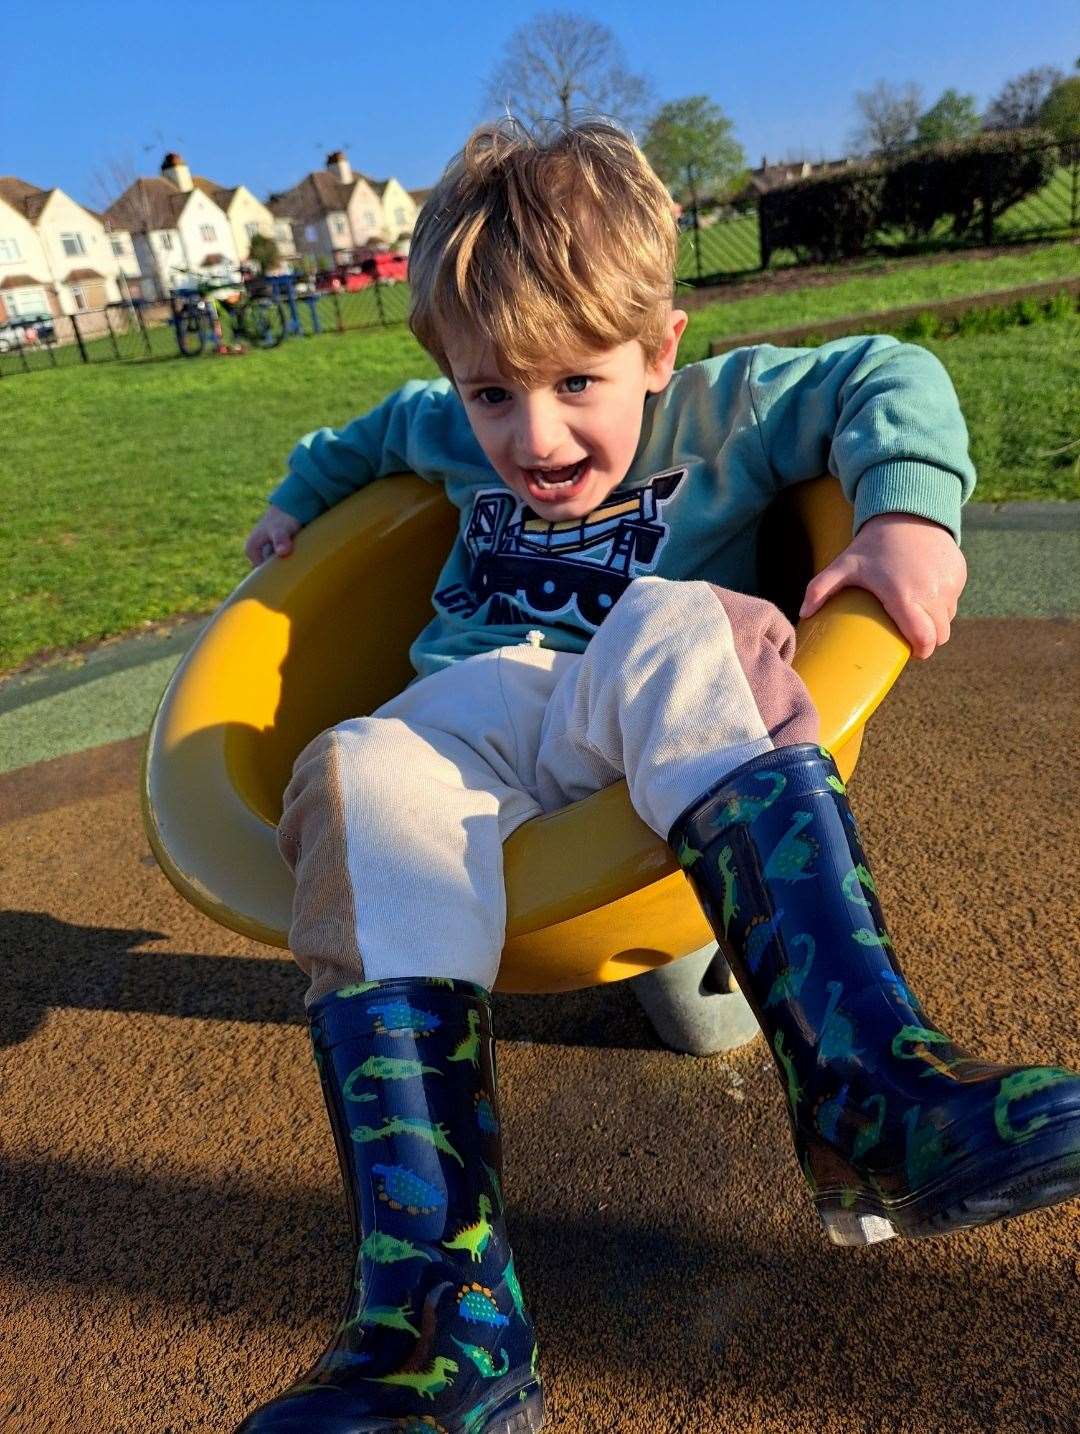 Elijah Matthews, from Herne Bay, is now left exhausted after a trip to the park